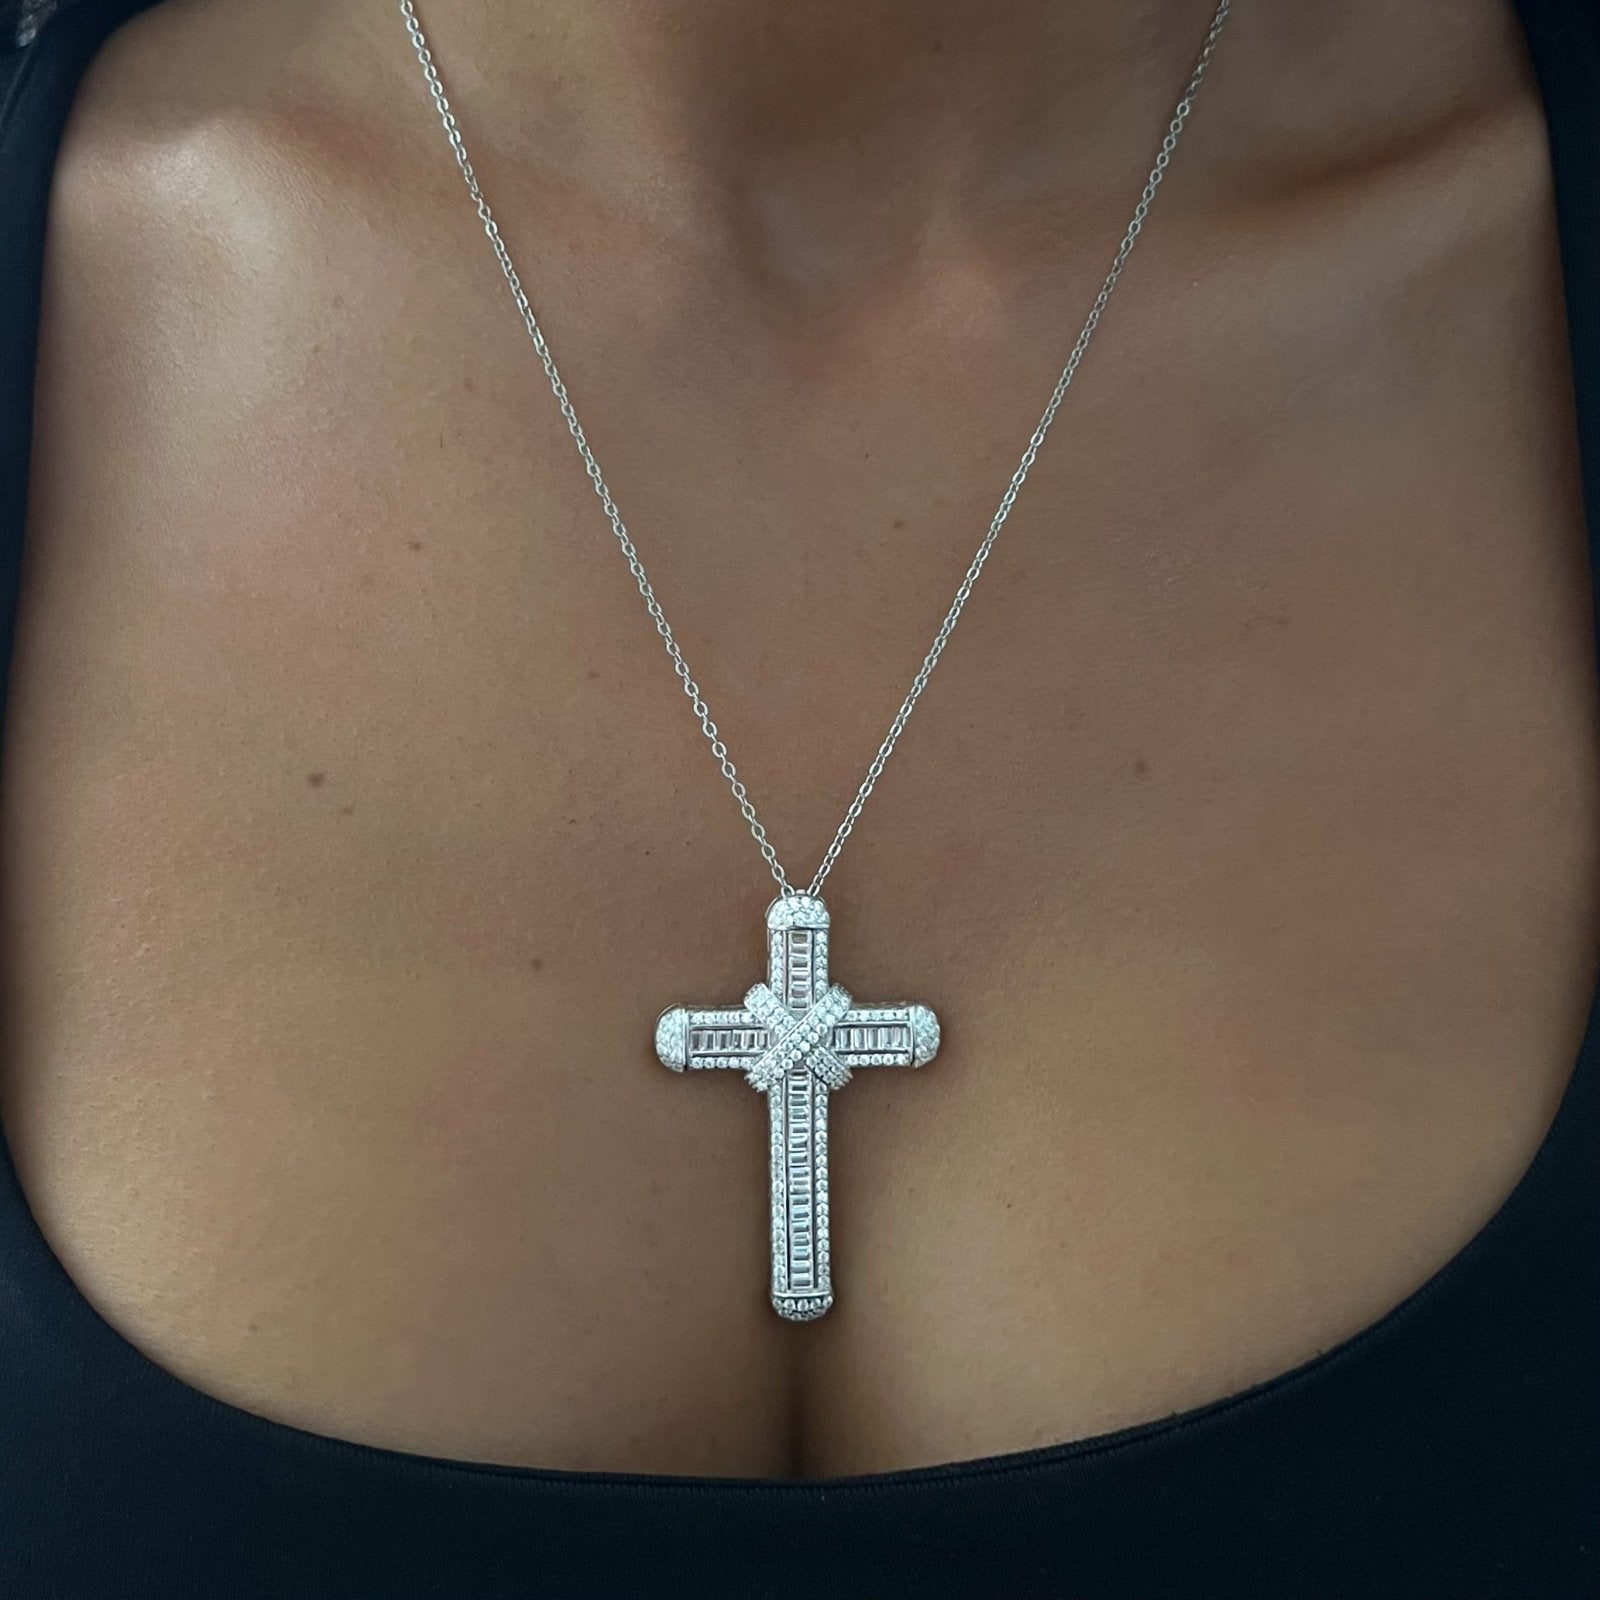 Sterling Silver Large Luxe Cross Pendant Necklace - Luxe Emporium x